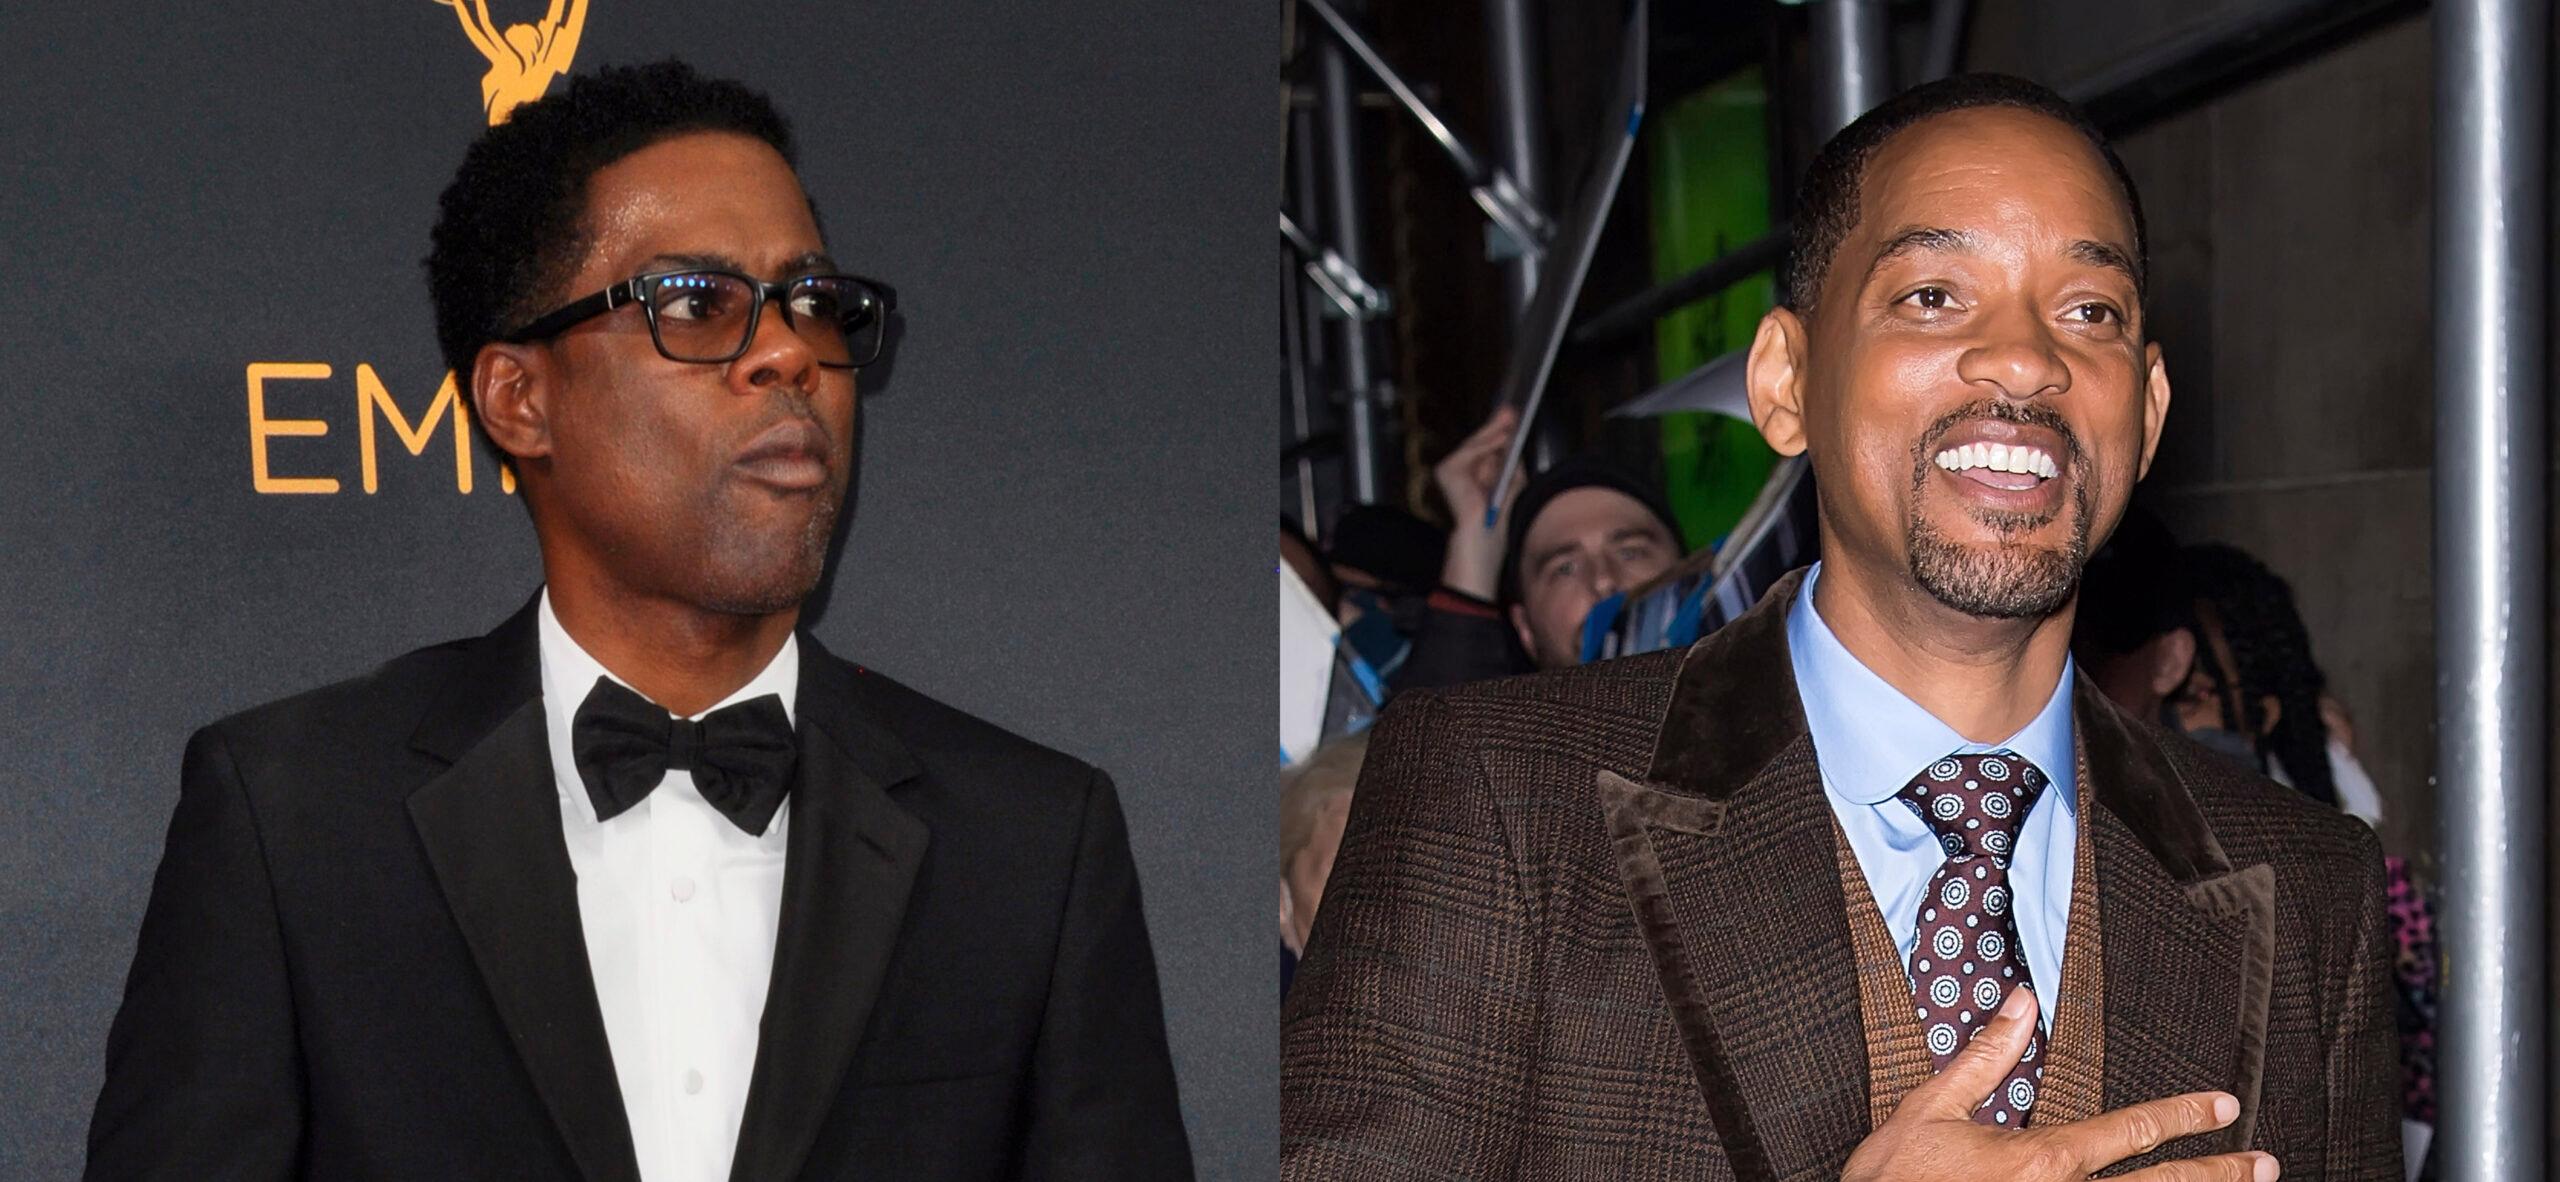 Chris Rock & Dave Chappelle Take Aim At Will Smith & His 'Apology'